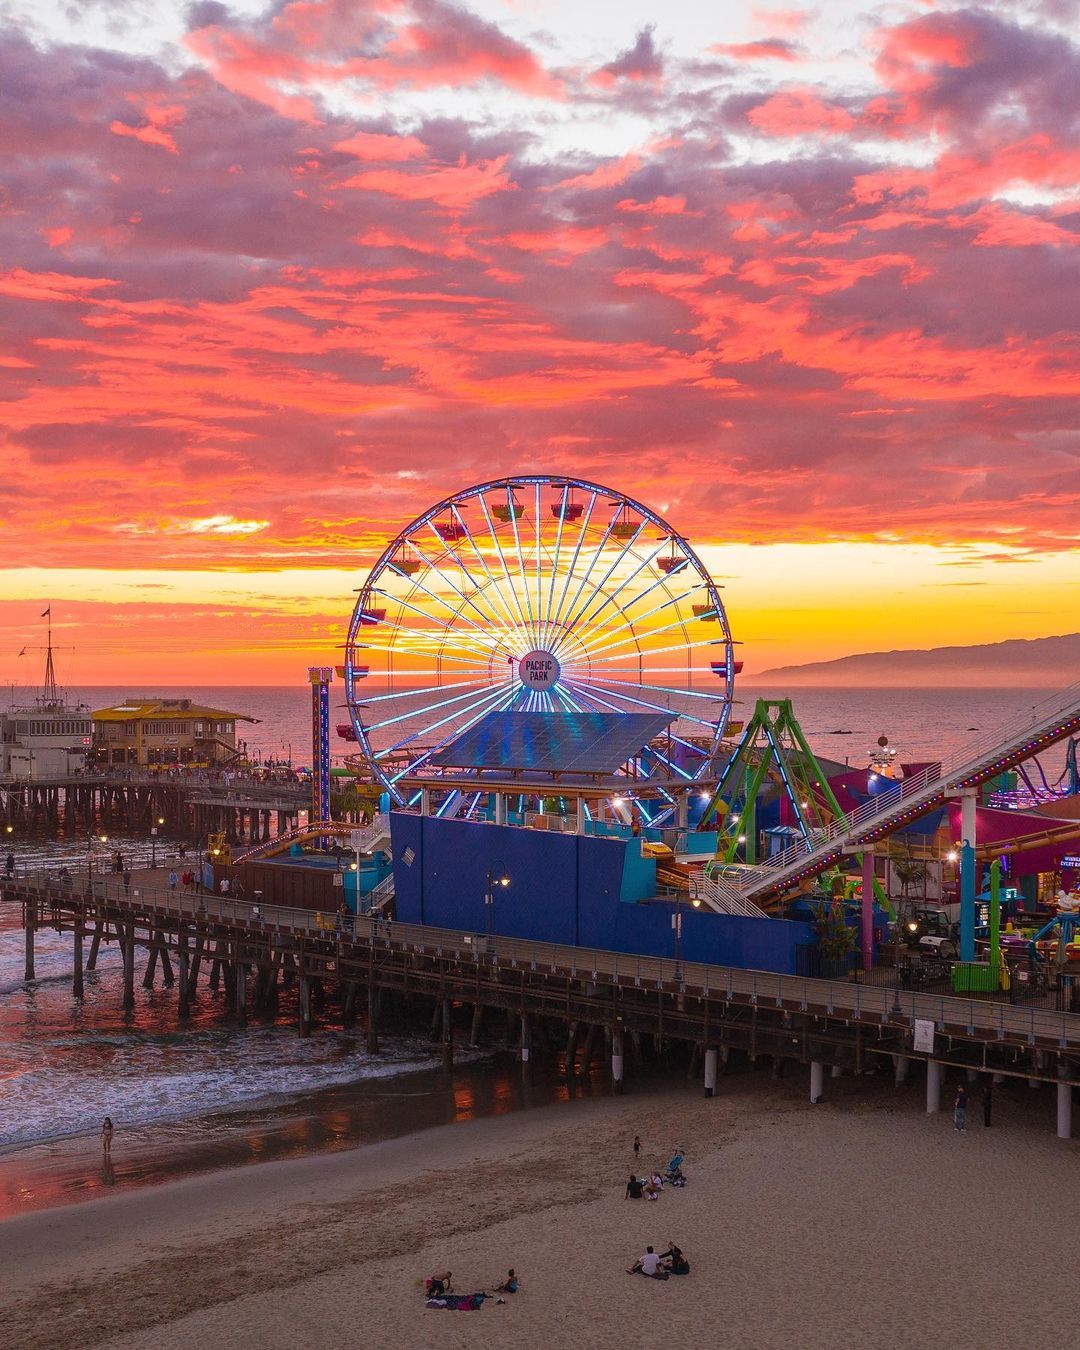 #PhotooftheWeek: Great picture of our Pacific Wheel and California sunset!! You really can't get this anywhere else... 😍🌅🔥  📸: @asenseofhuber  #PacificPark #PacPark #TravelPhotography #SantaMonica #SantaMonicaPier #SantaMonicaBeach #CaliforniaLove #LosAngeles #SoCal  #Sunset #Sunsetlover